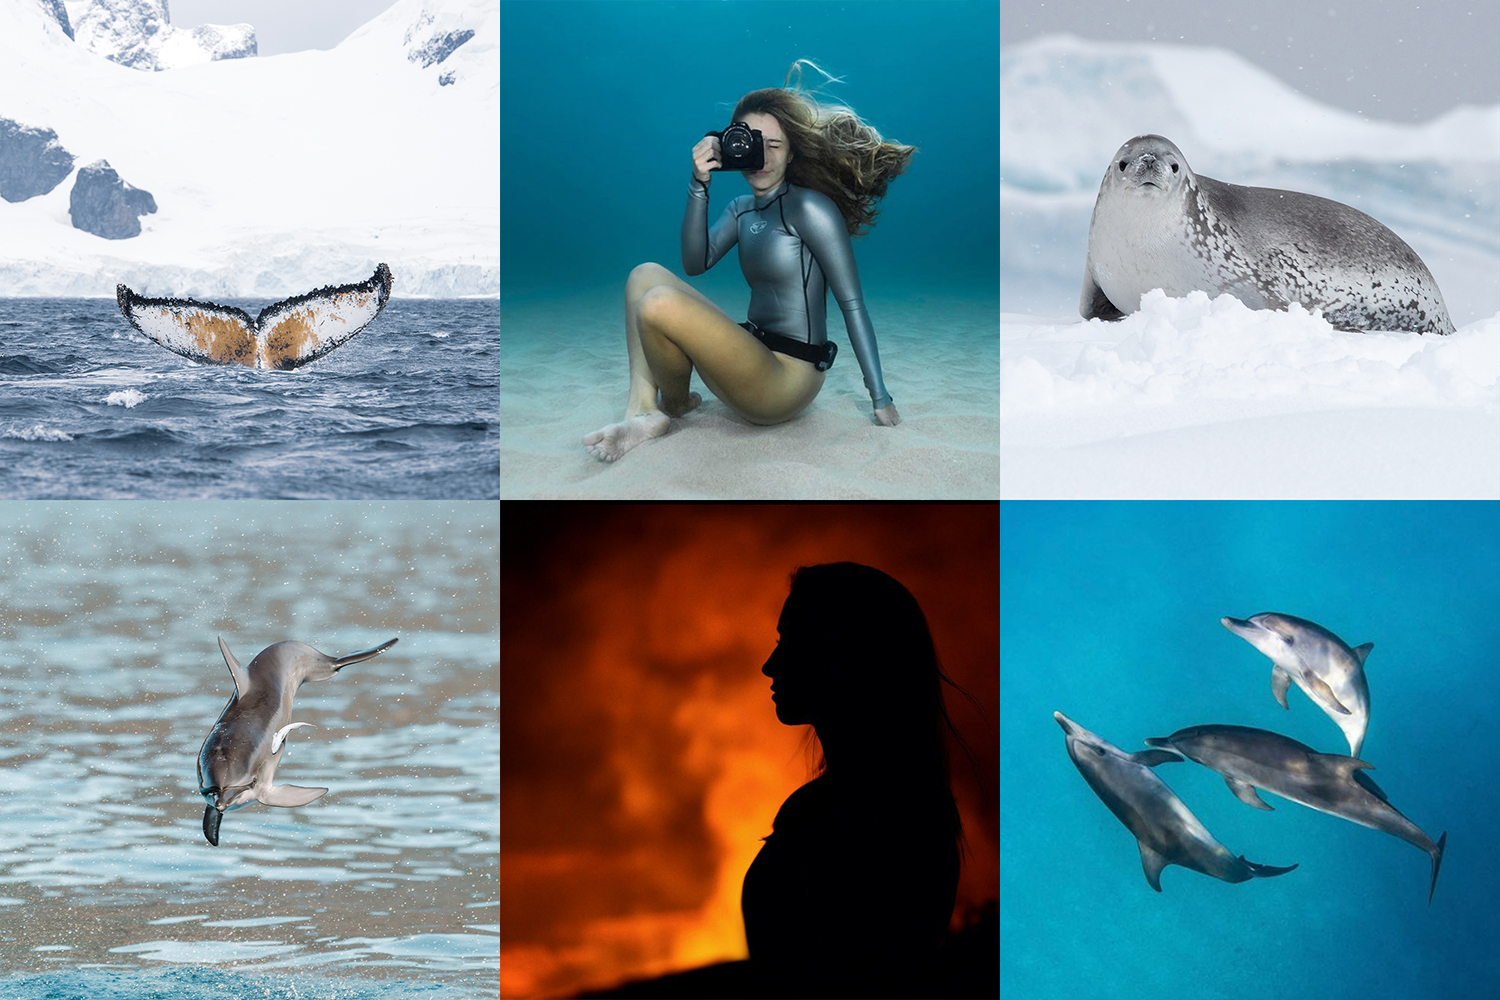 A collage of images shows sea creatures on snow and underwater.